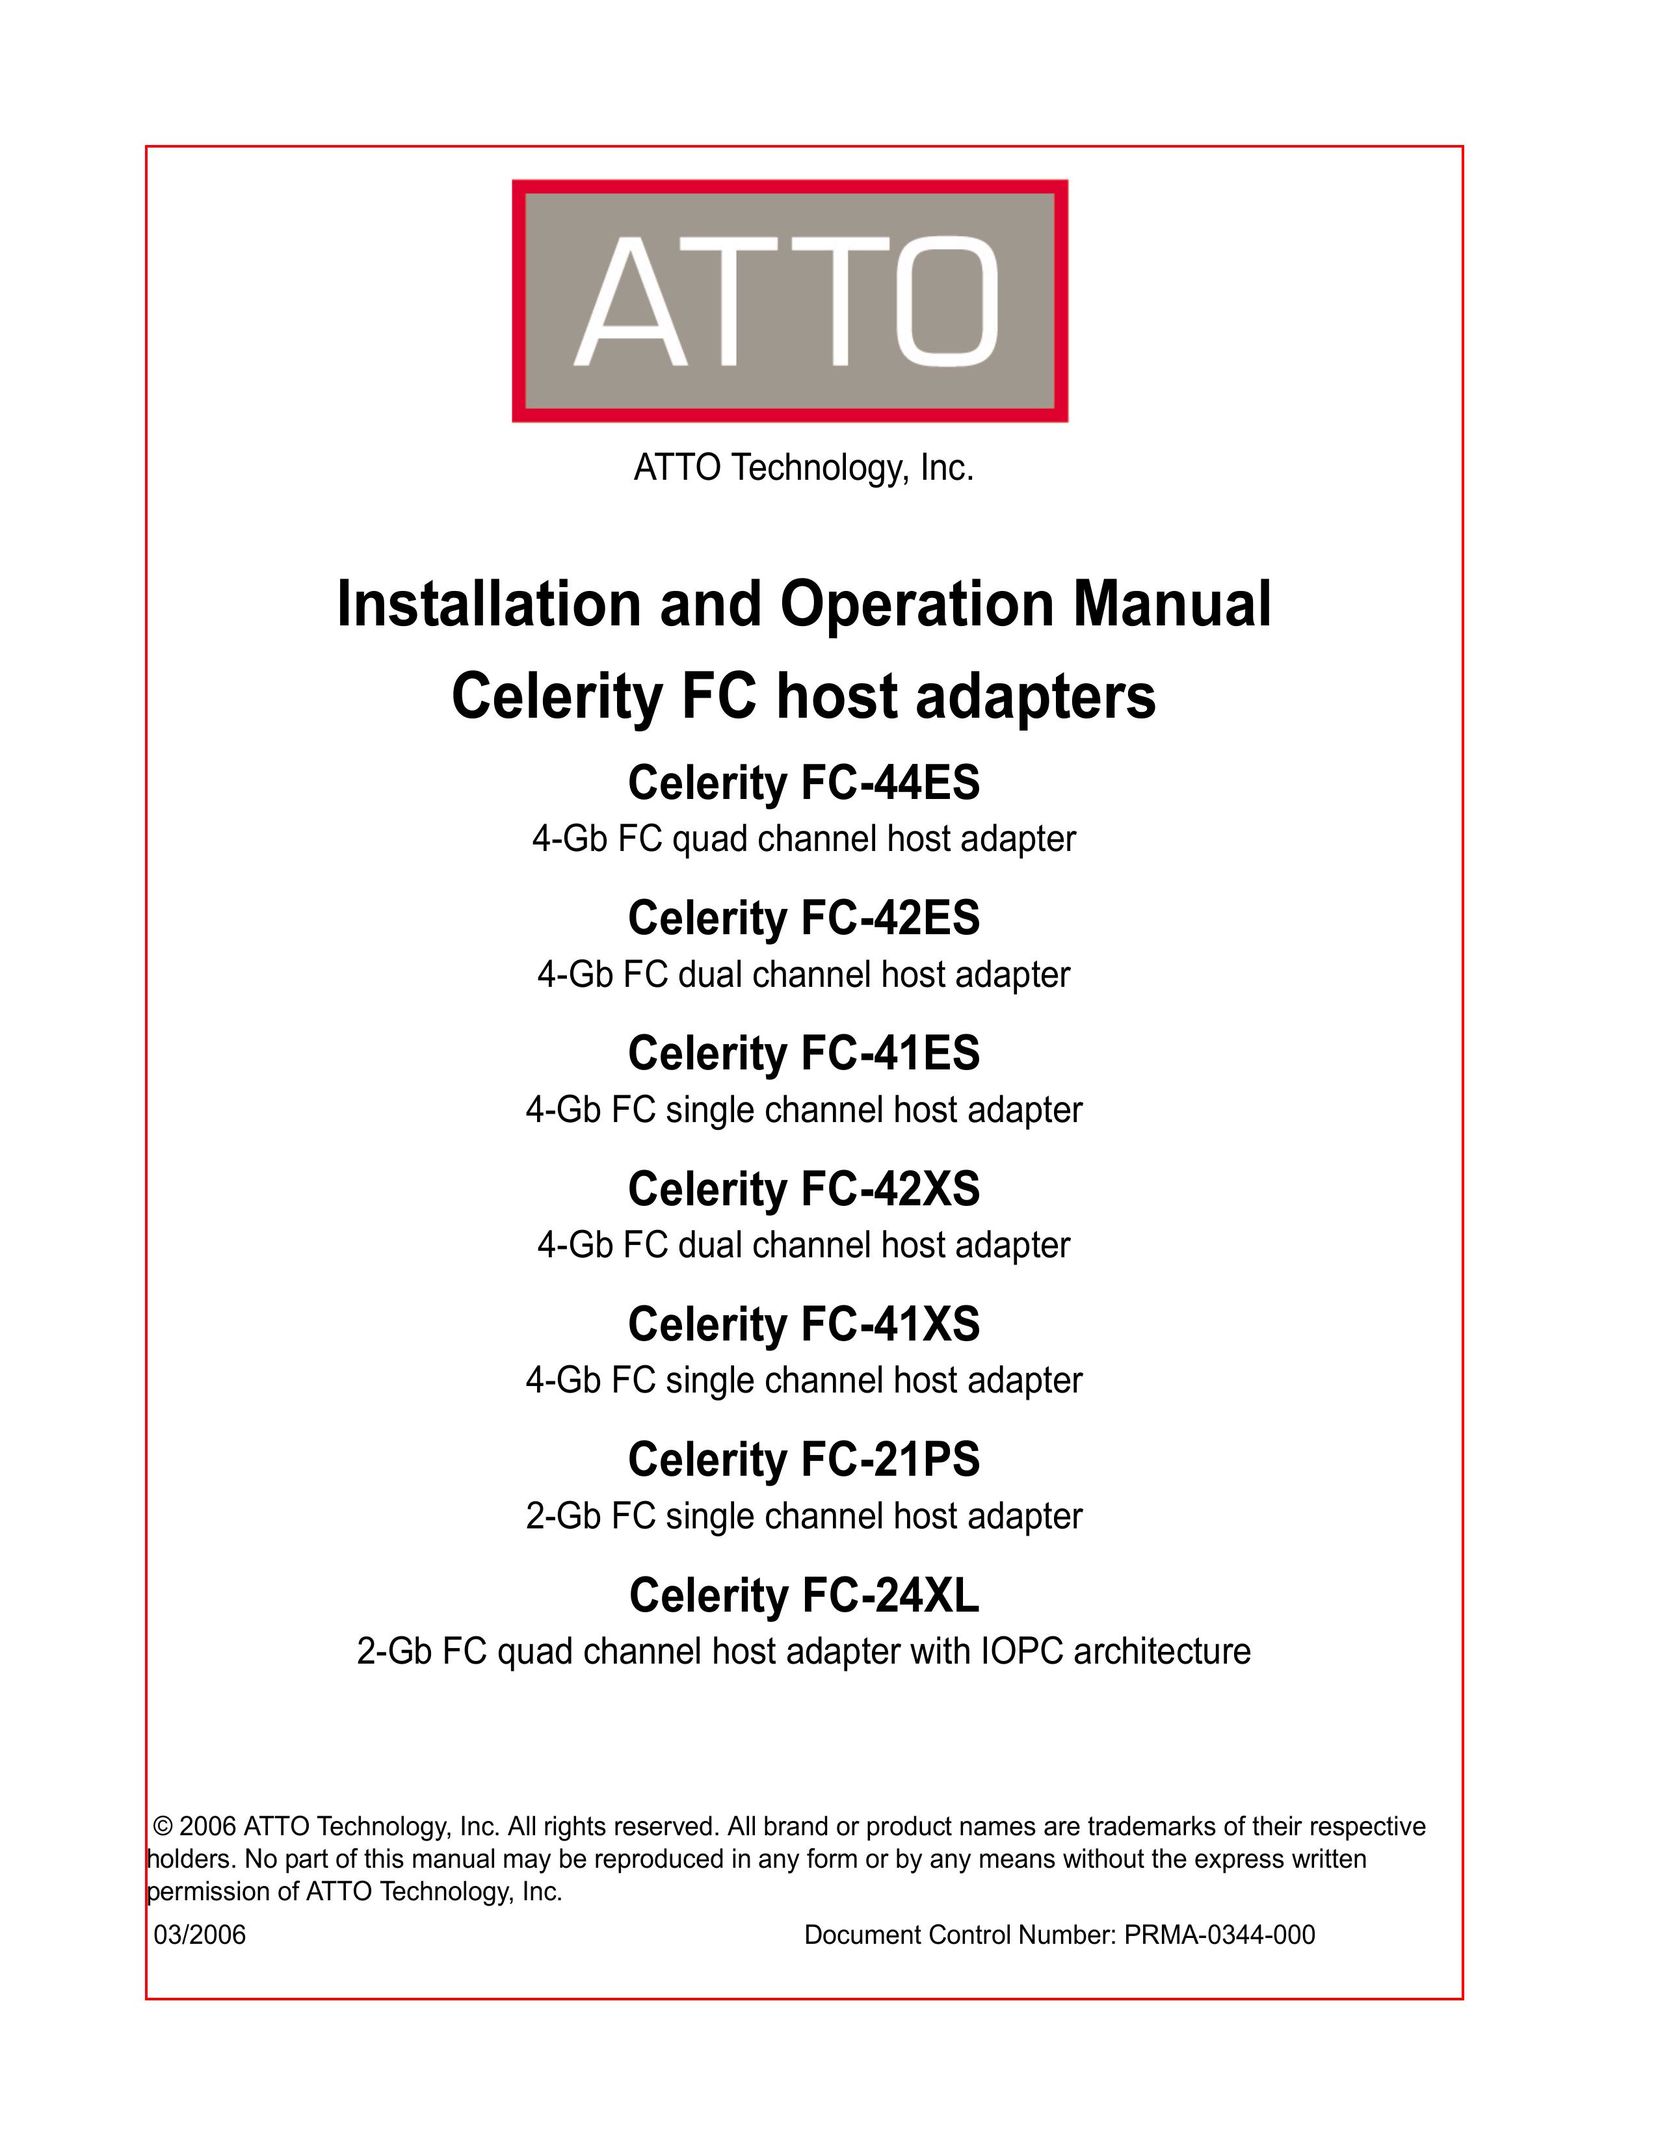 ATTO Technology FC-44ES 4-Gb Network Card User Manual